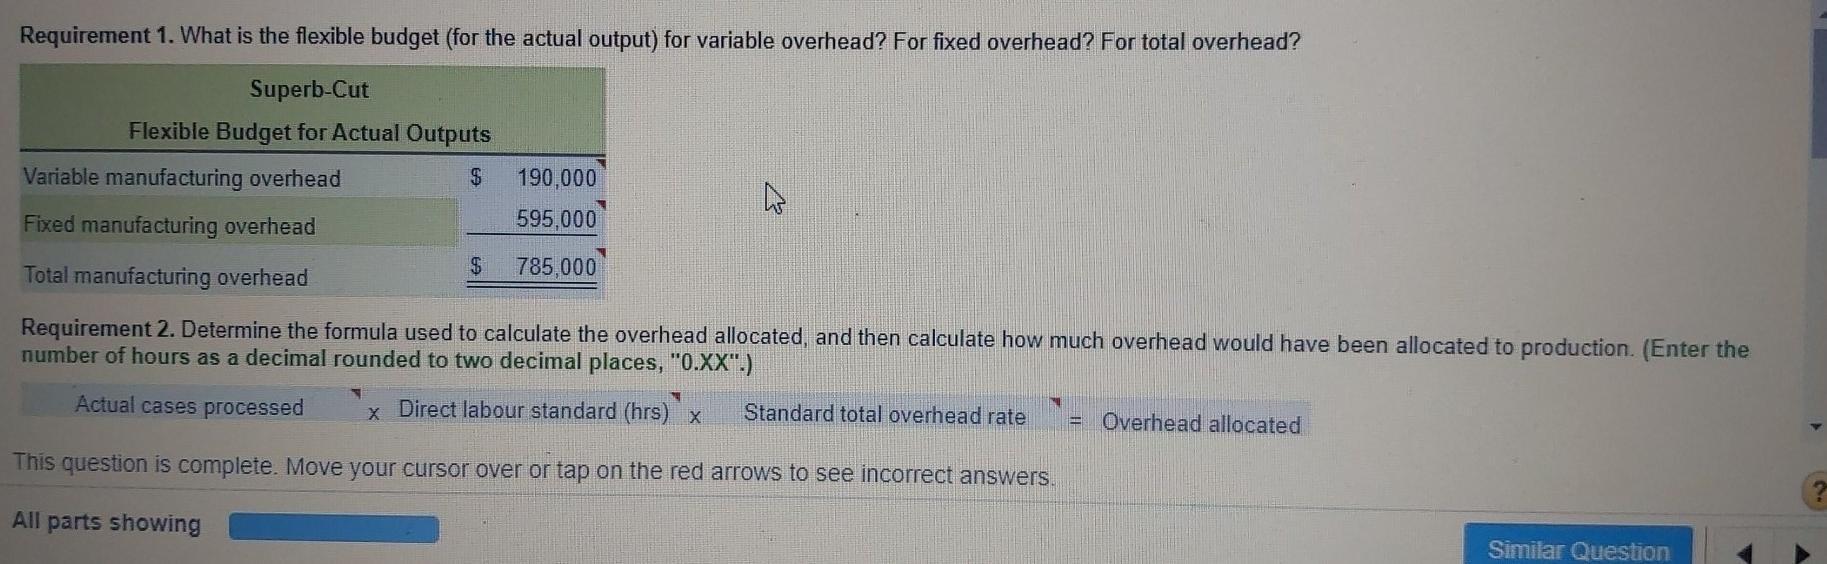 Requirement 1. What is the flexible budget (for the actual output) for variable overhead? For fixed overhead? For total overh